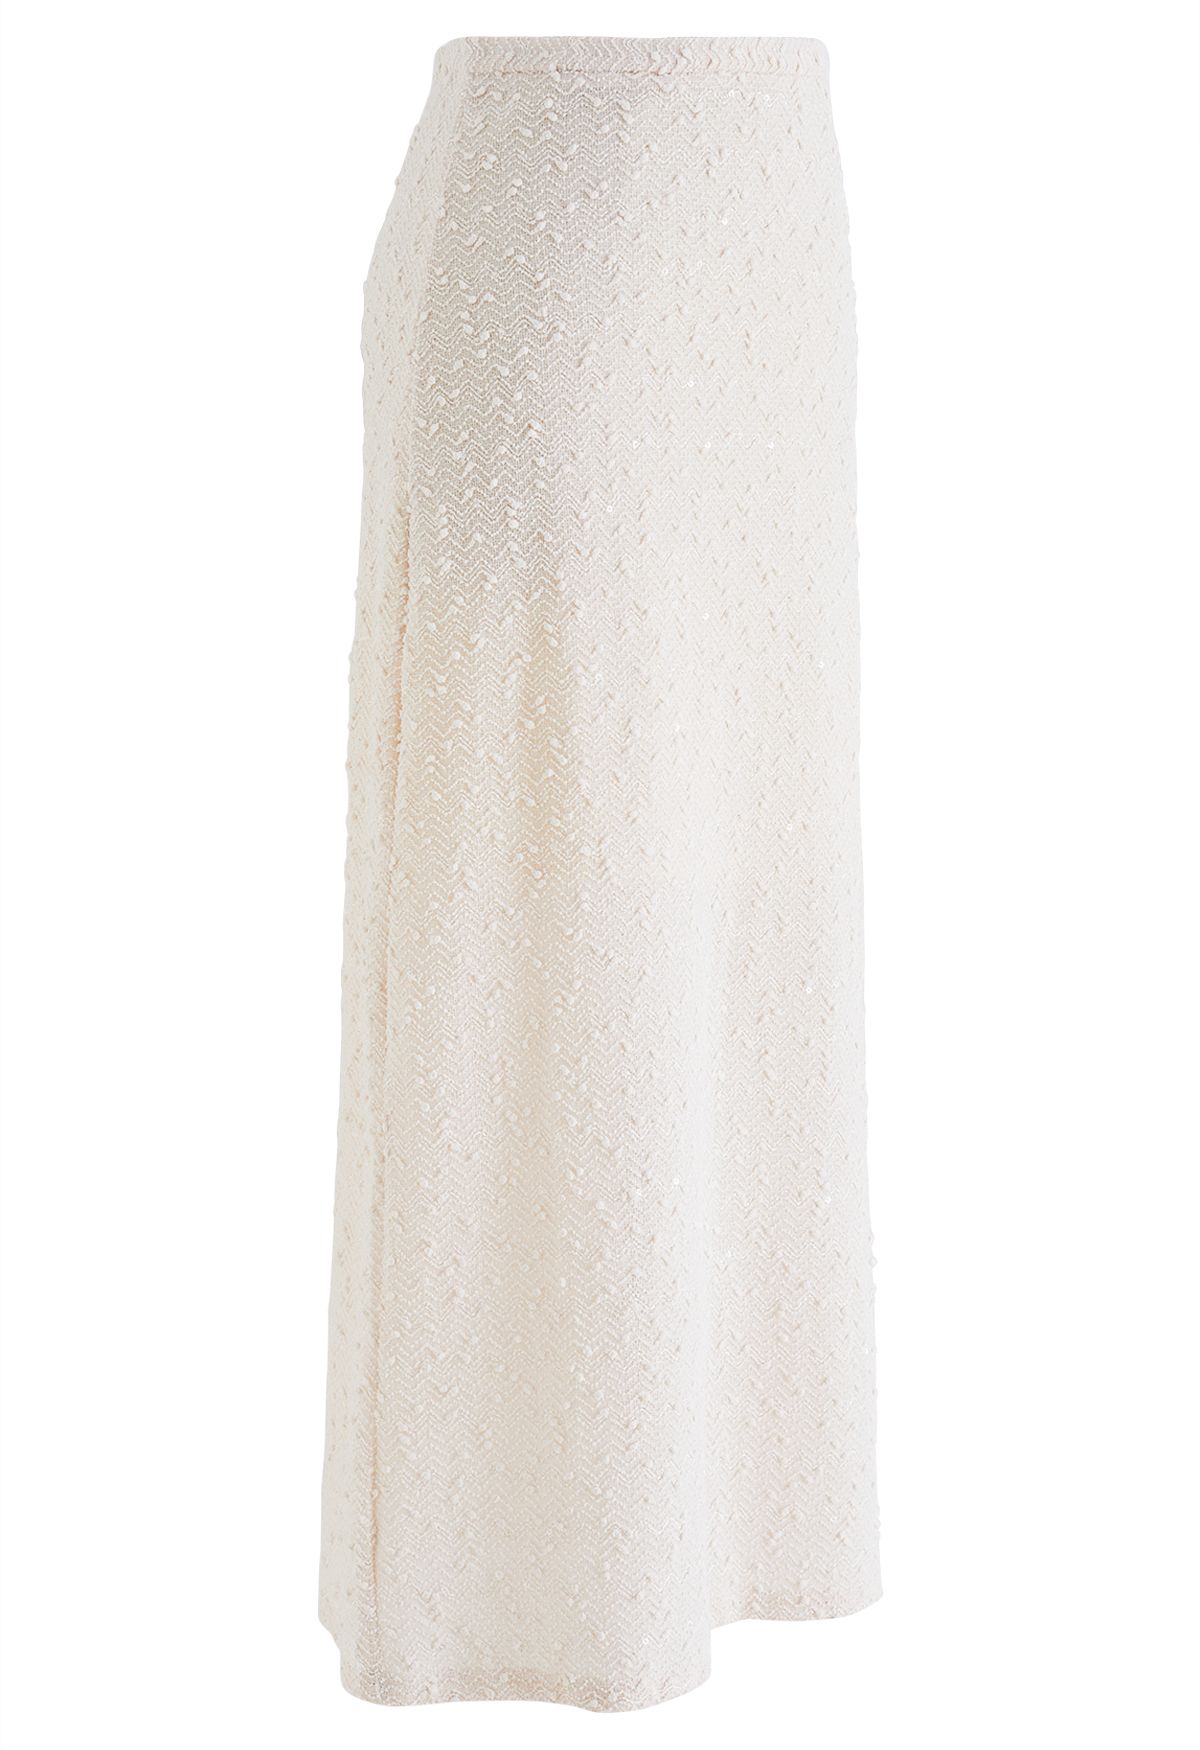 Dotted Wavy Texture Pencil Maxi Skirt in Cream